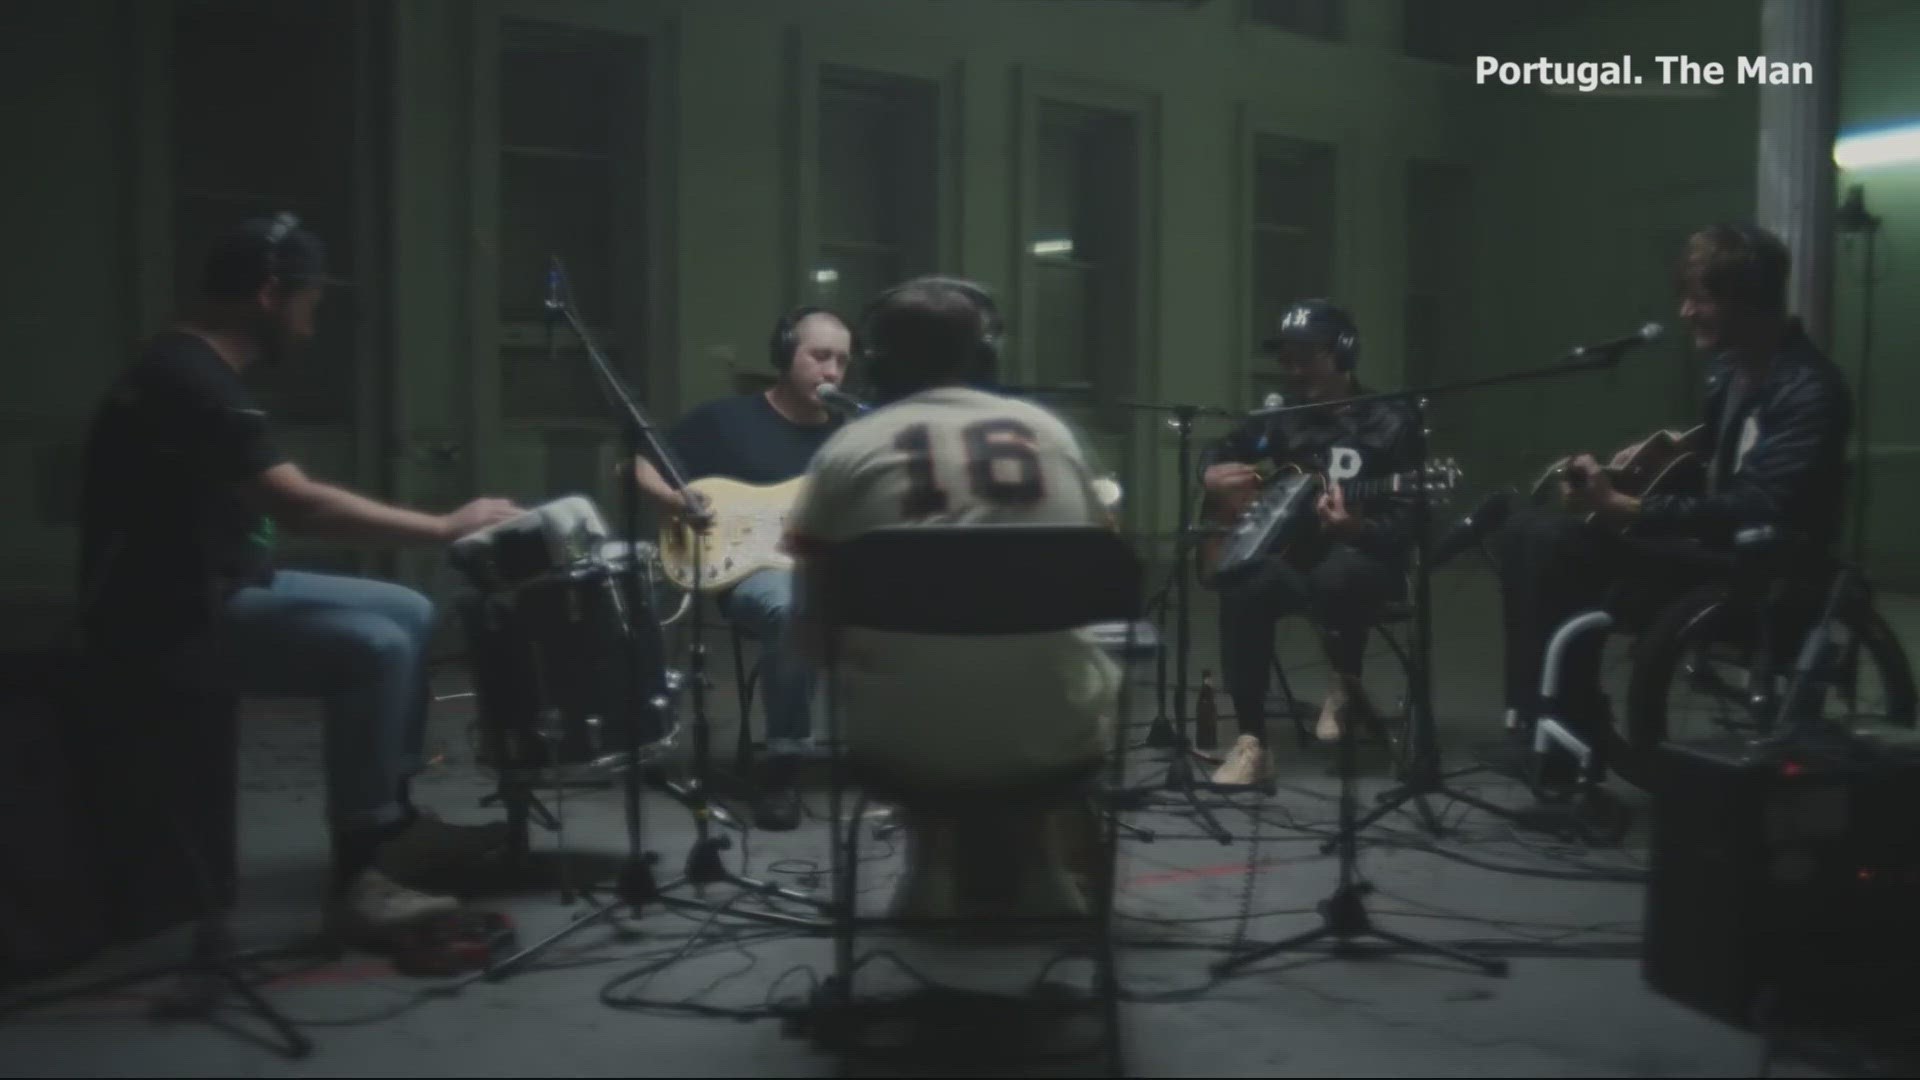 The Portland band Portugal. The Man has a sold out show in Troutdale Friday. Lead Singer and guitarist John Gourley talks about the band's new album.